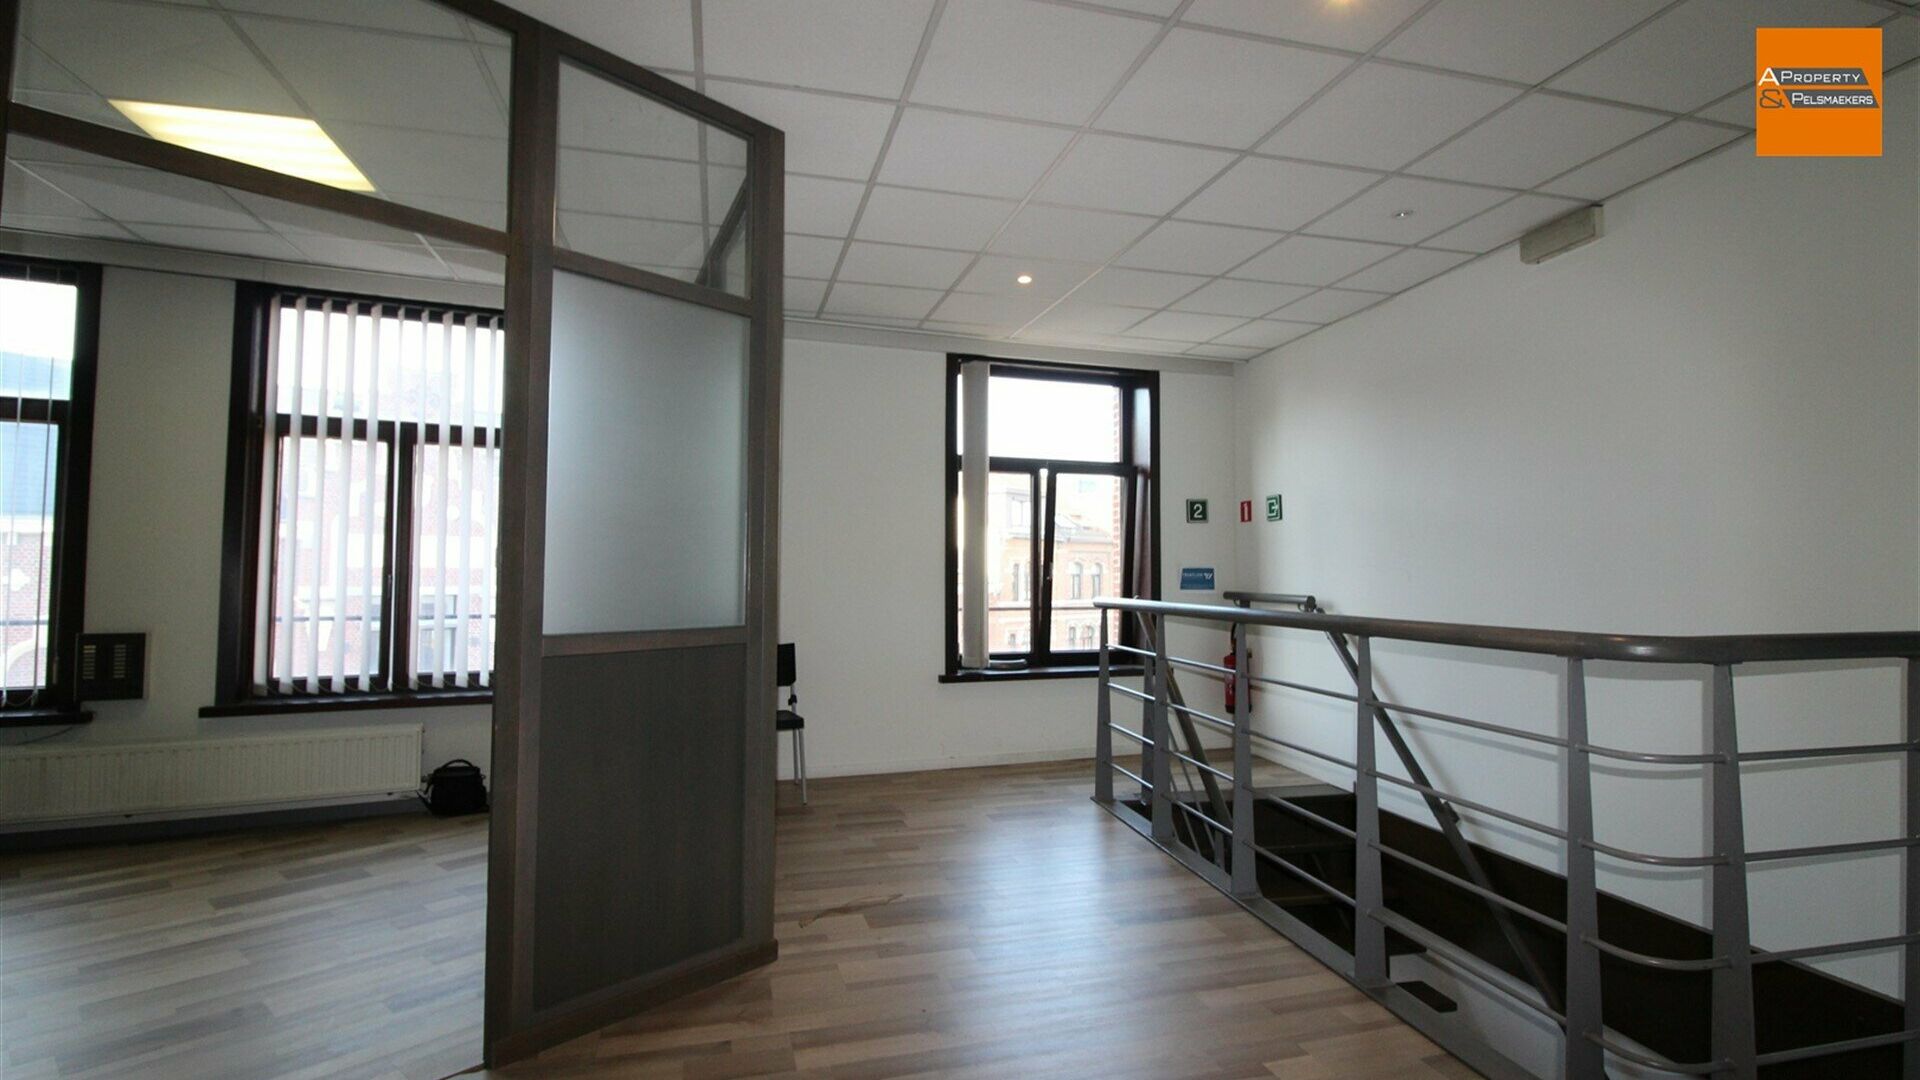 Offices for rent in Kessel-Lo